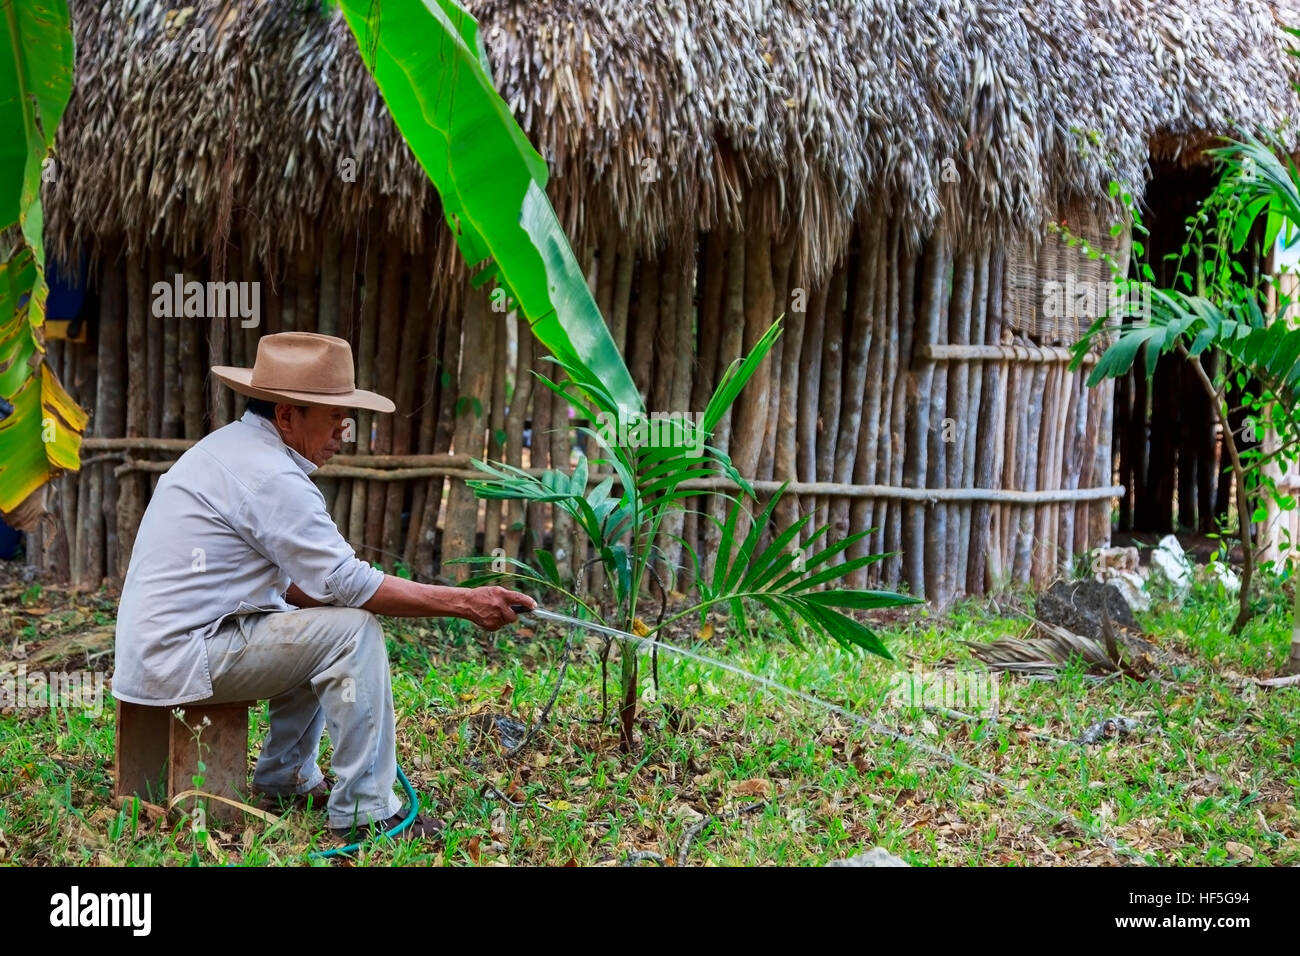 Mayan farmer watering the garden at the side of his traditional Mayan grass thatched house, Yucatan, Mexico Stock Photo